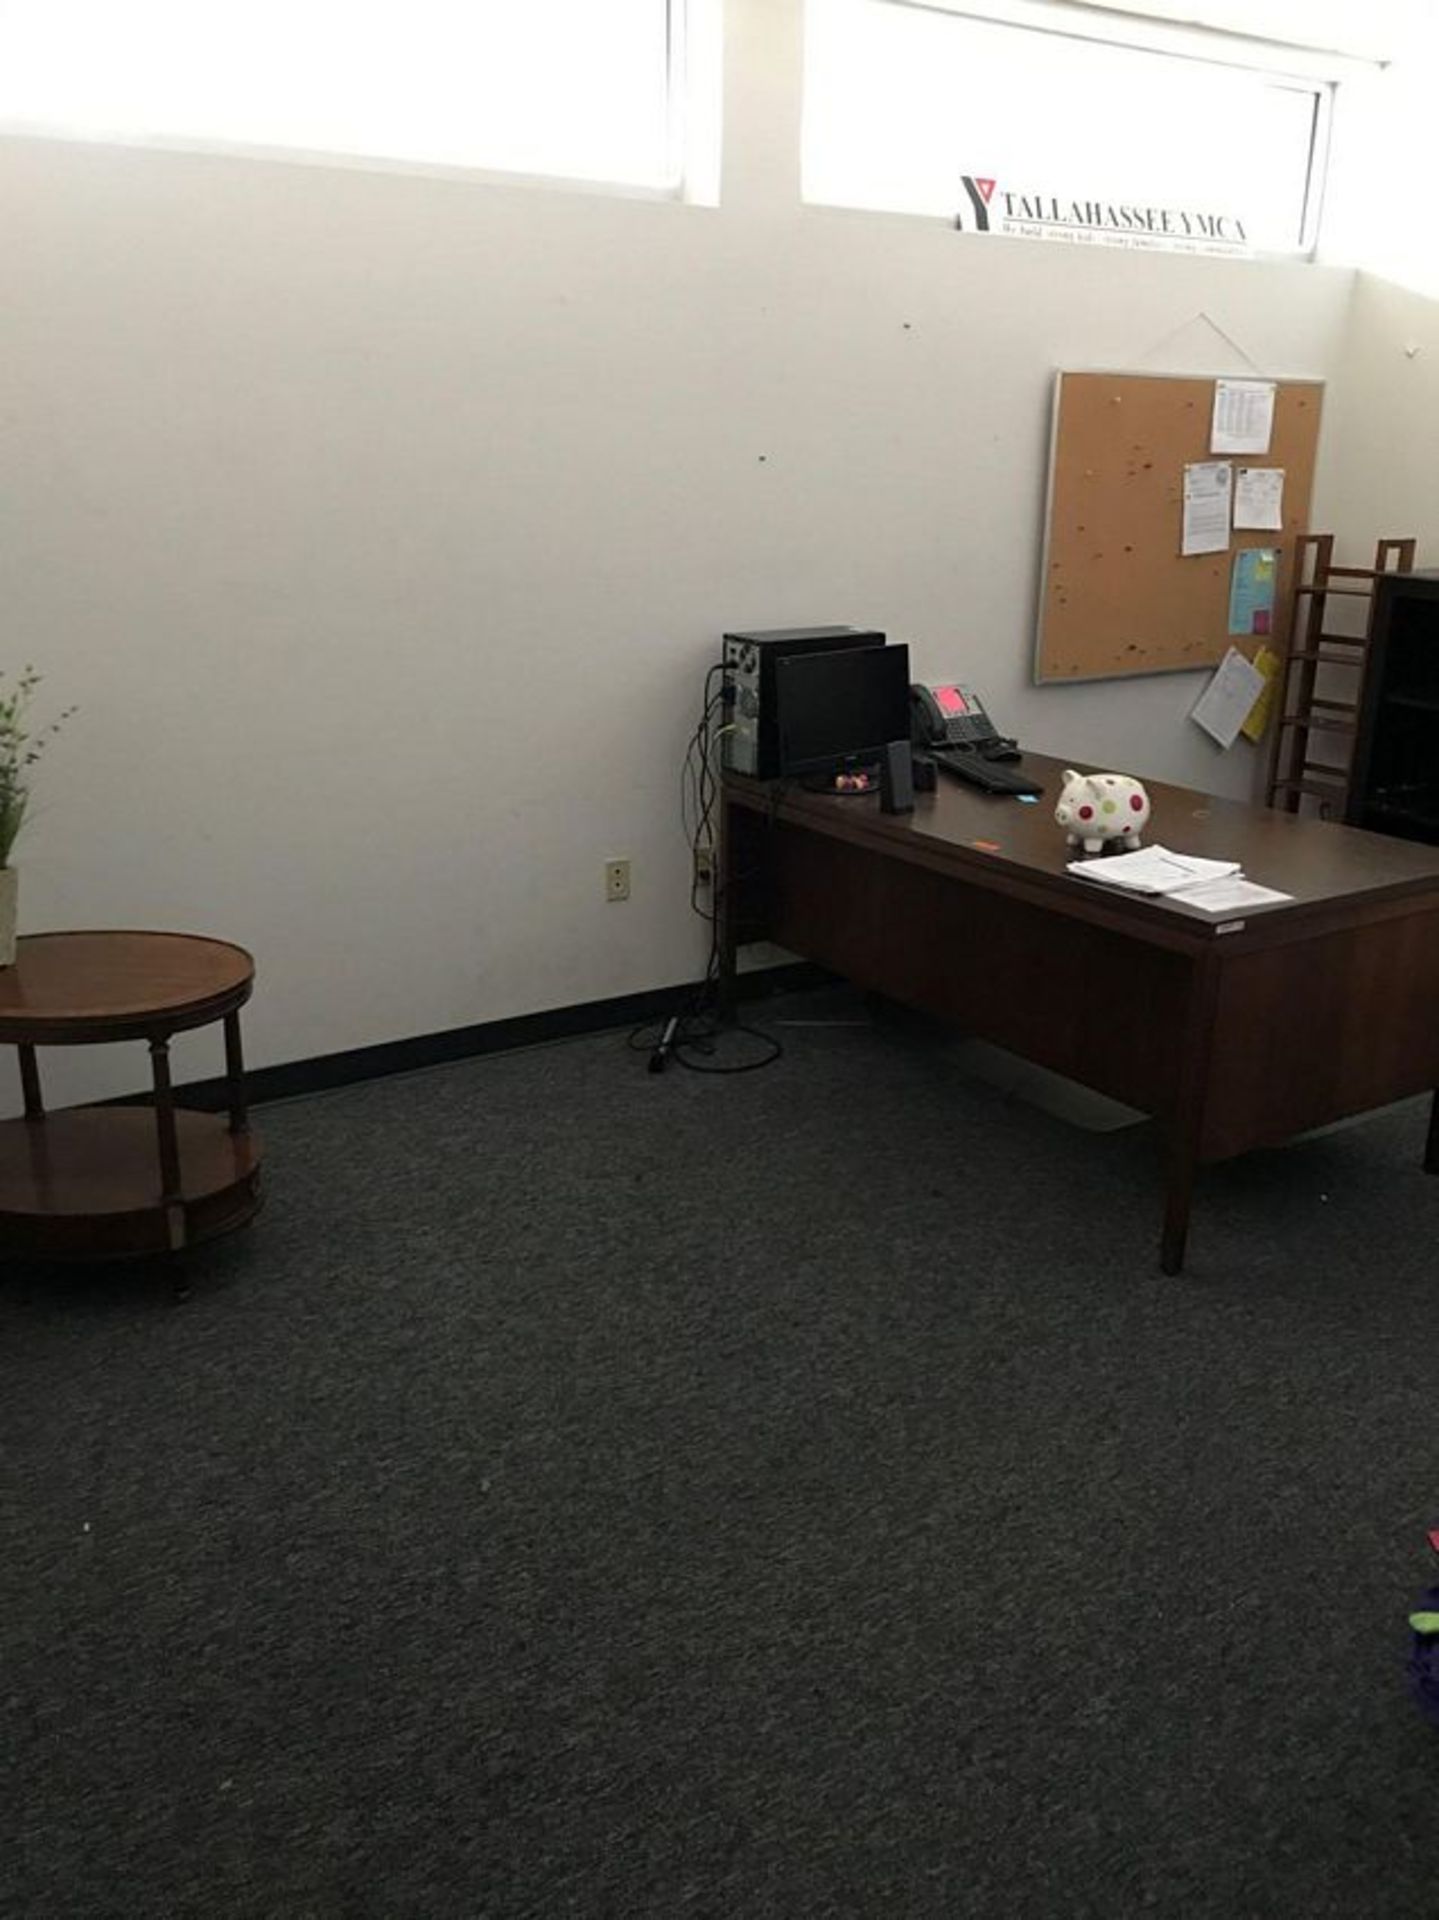 OFFICE TO INCLUDE WOOD DESK, (2) WOOD SHELVING UNITS, WOOD SIDE TABLE, CISCO PHONE AND LAMP